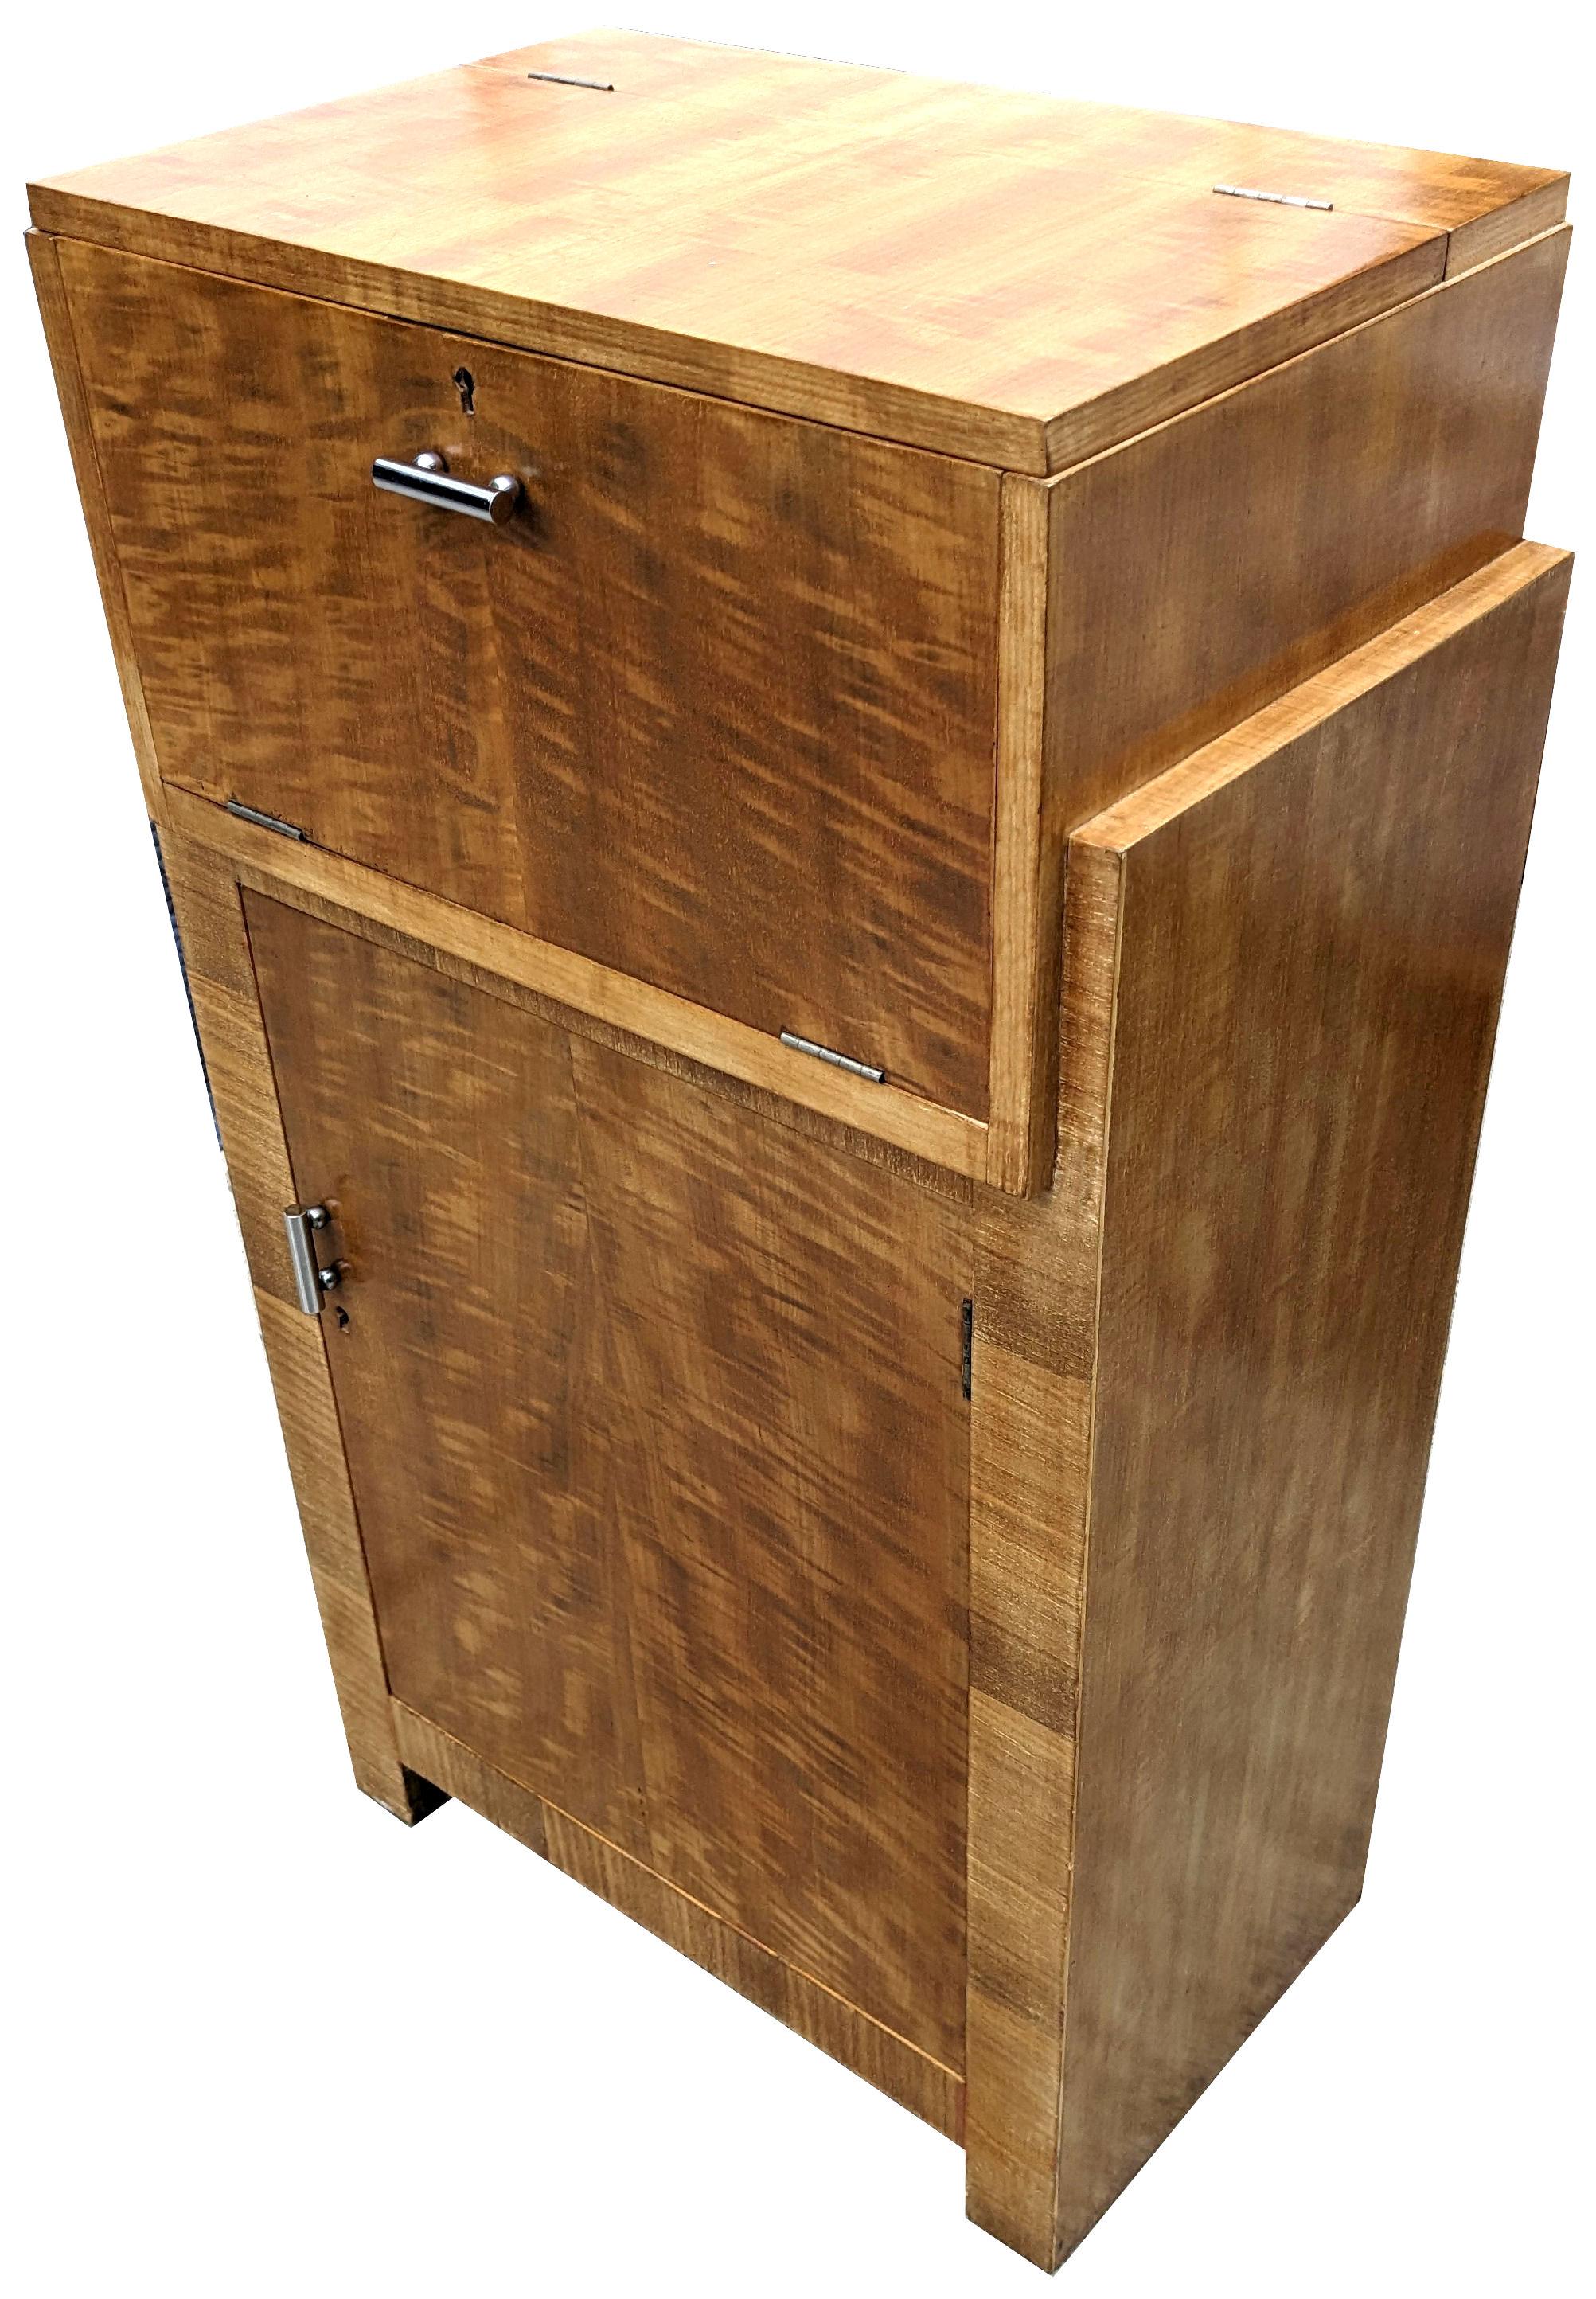 English Art Deco Satinwood Cocktail Cabinet, Dry Bar By Waring & Gillow, England, c1930 For Sale